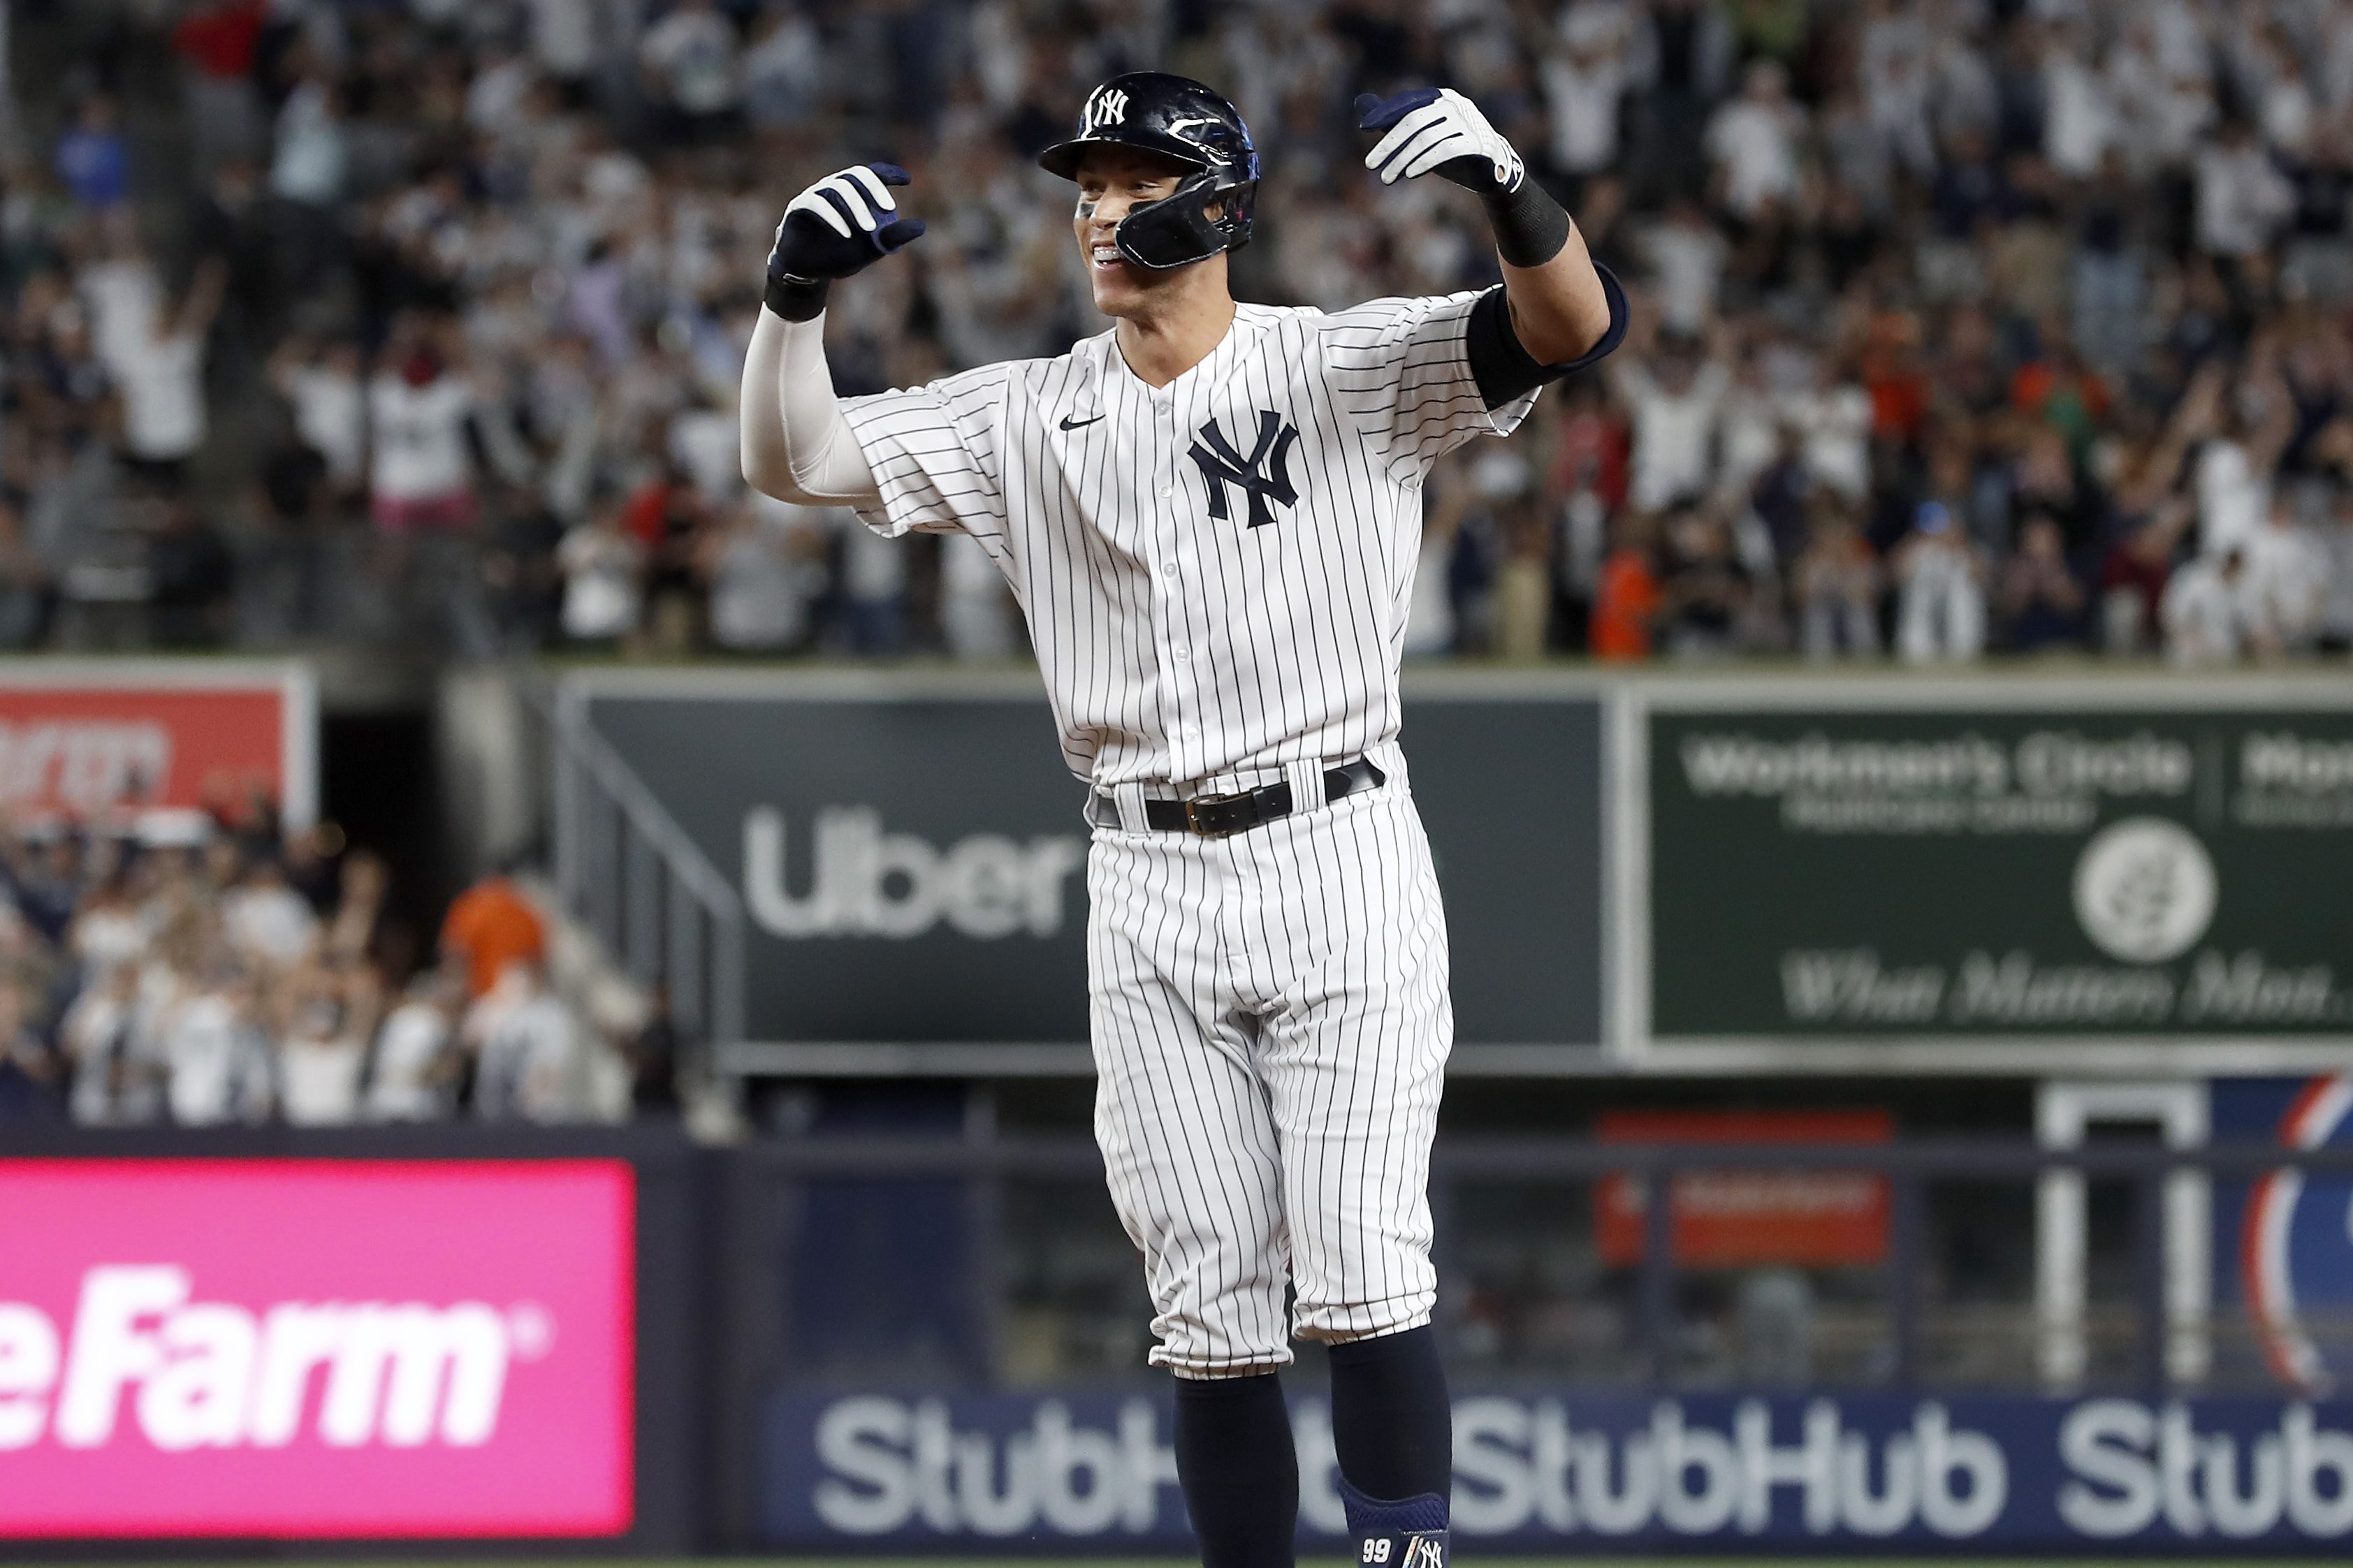 Talkin' Baseball on X: Aaron Judge was the only Yankee to connect